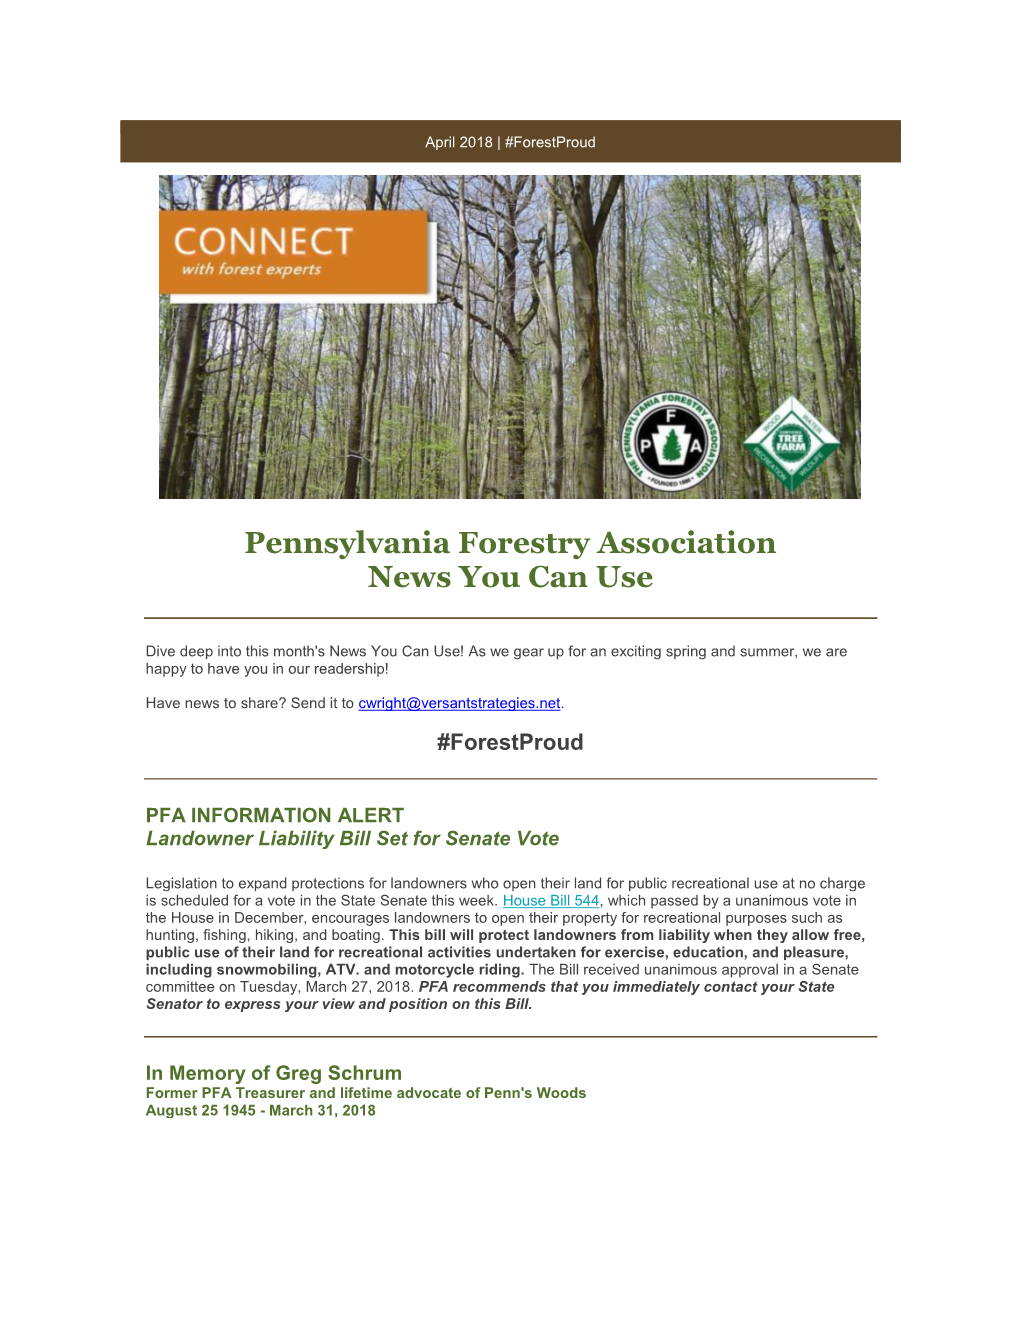 Pennsylvania Forestry Association News You Can Use